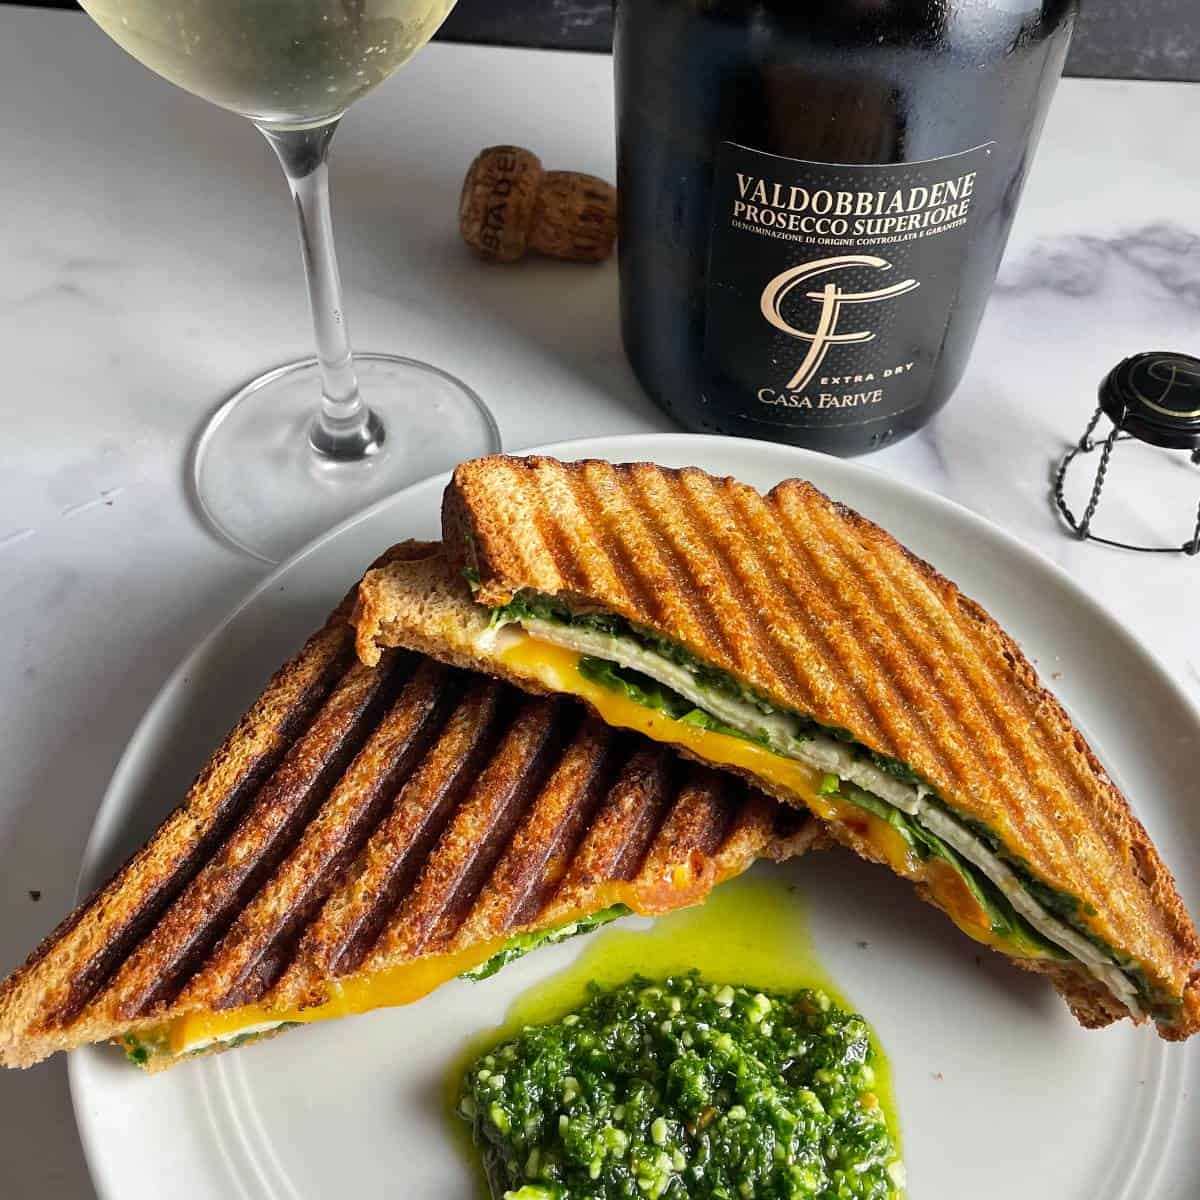 A turkey pesto panini, sliced in half and served along with an extra dollop of pesto. A bottle of Prosecco Superiore in the background.